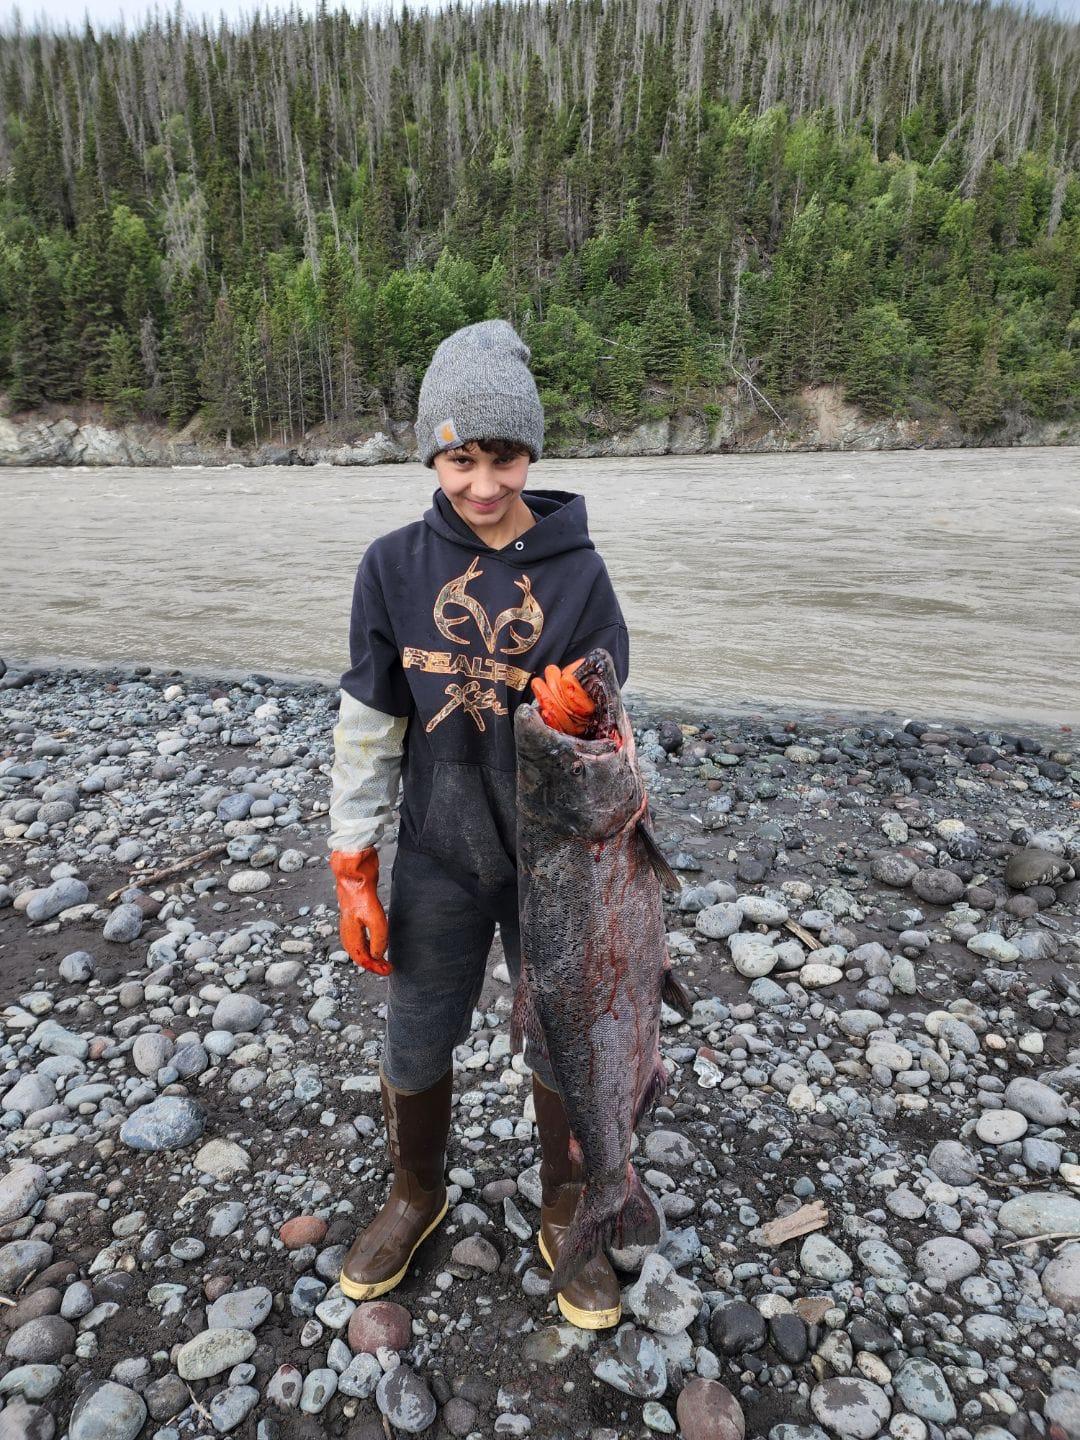 Chitina road trip to dip net salmon in the Copper River was a